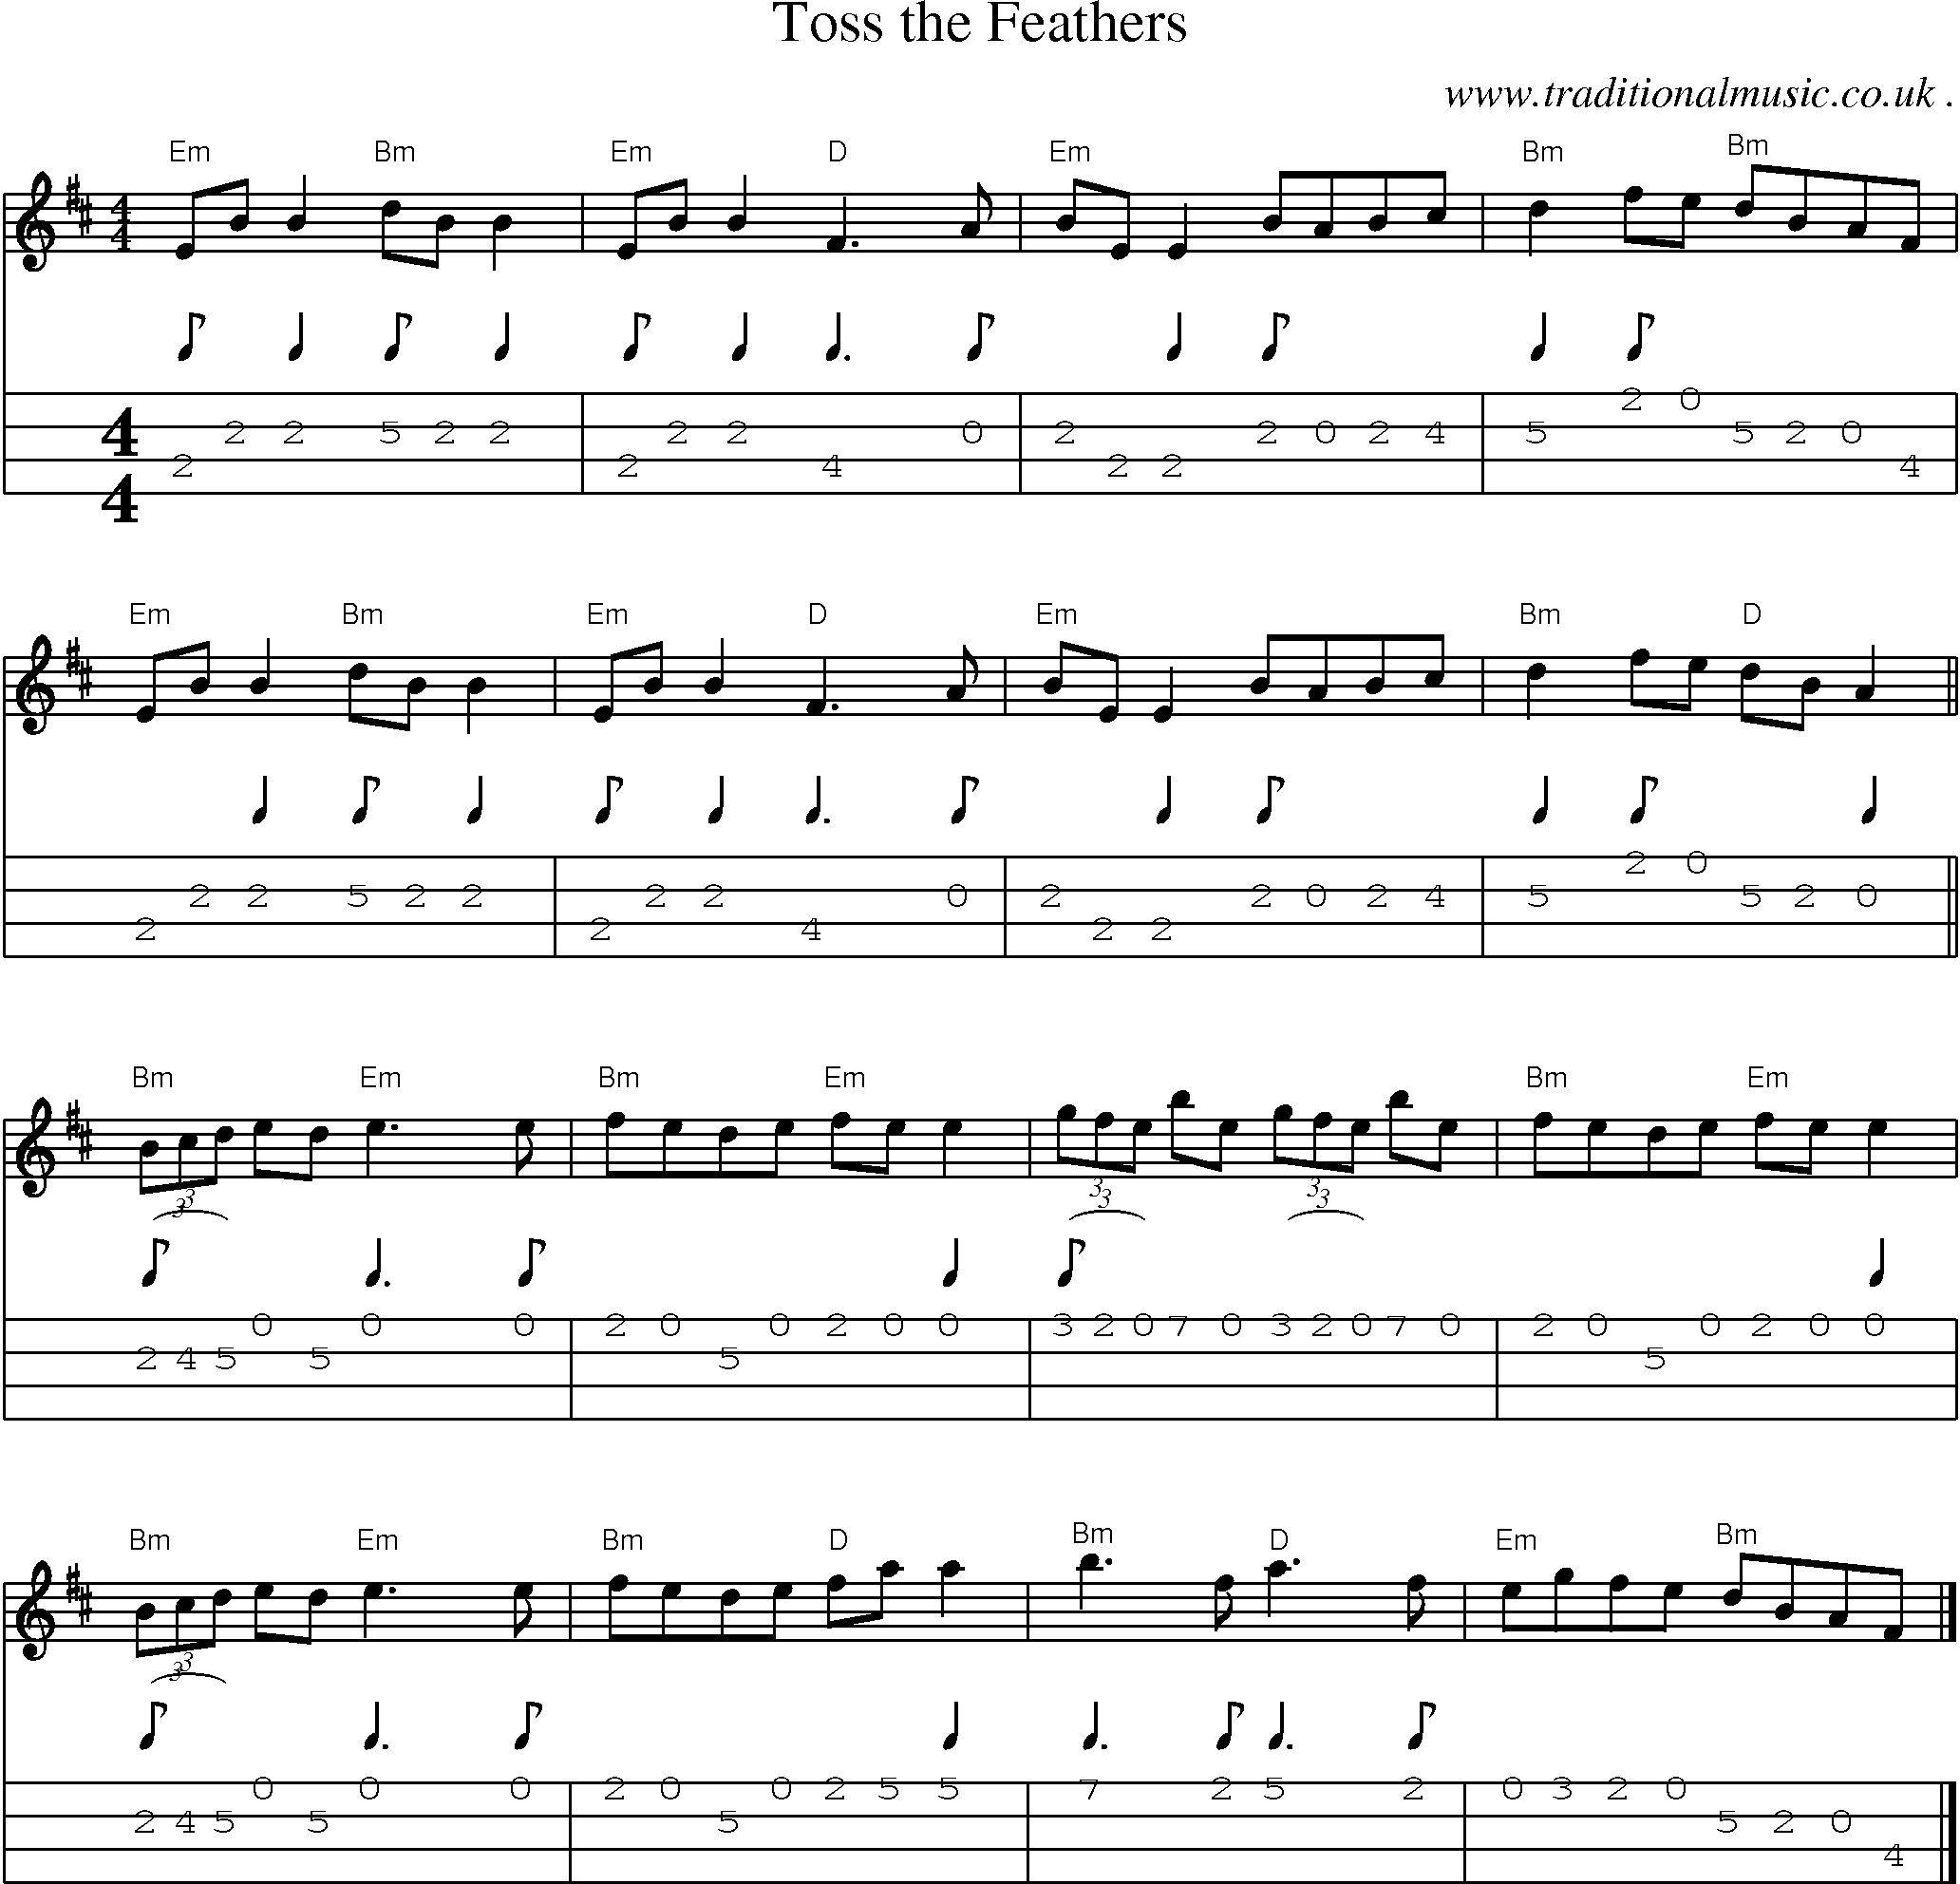 Music Score and Guitar Tabs for Toss the Feathers